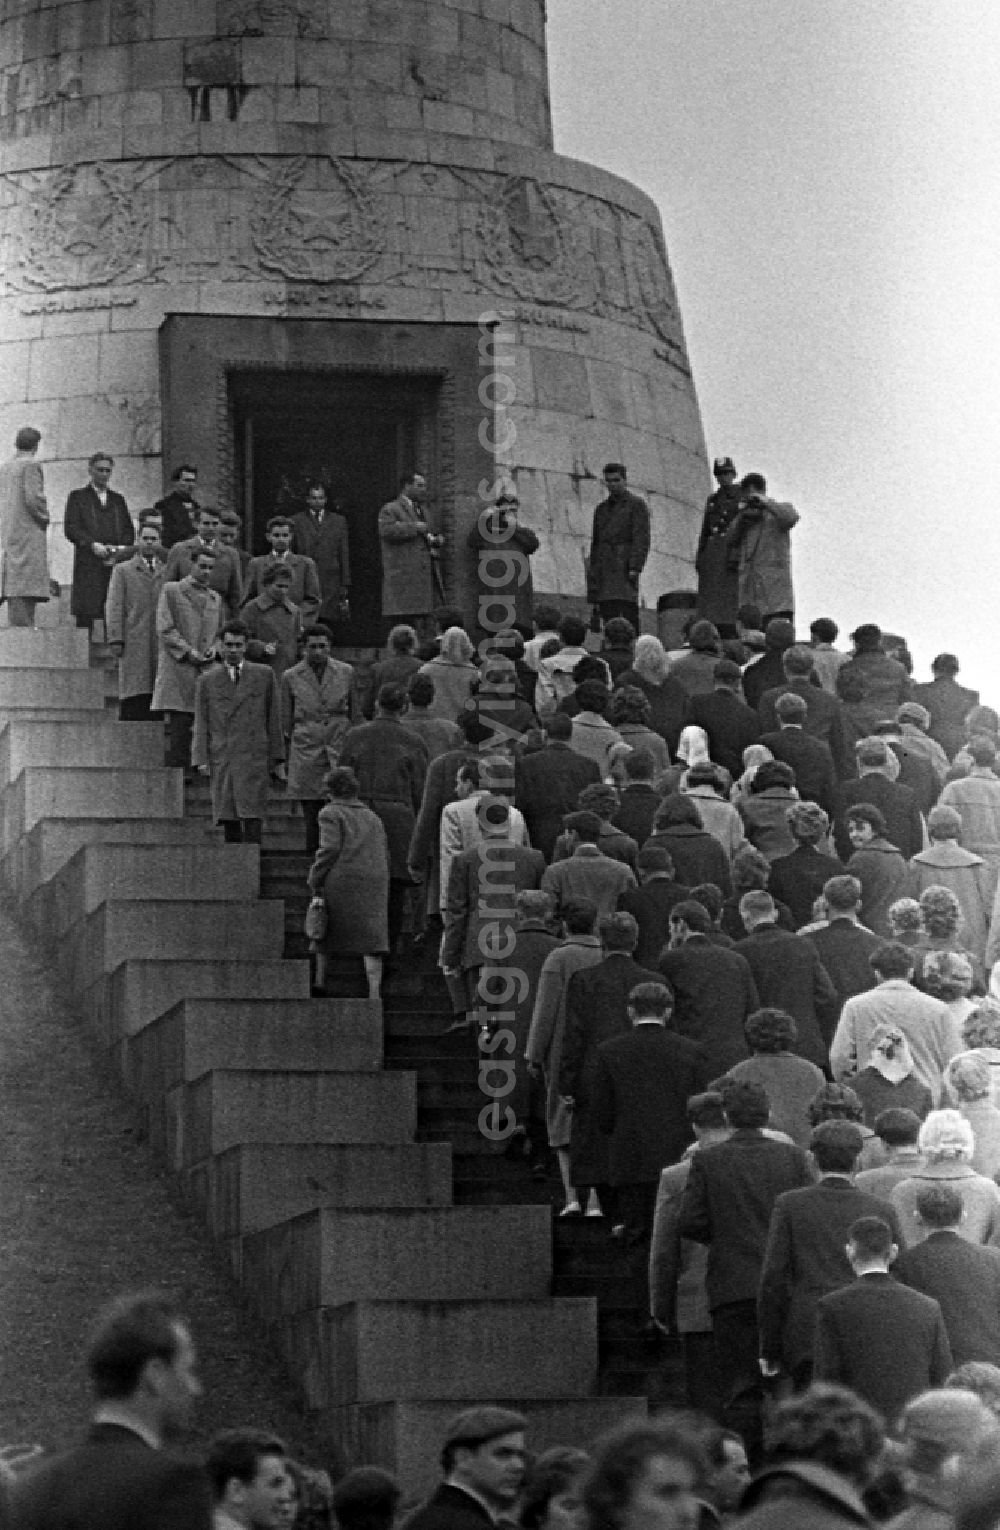 GDR image archive: Berlin - People commemorate liberation day at the soviet memorial in Treptow Park in Berlin Eastberlin on the territory of the former GDR, German Democratic Republic